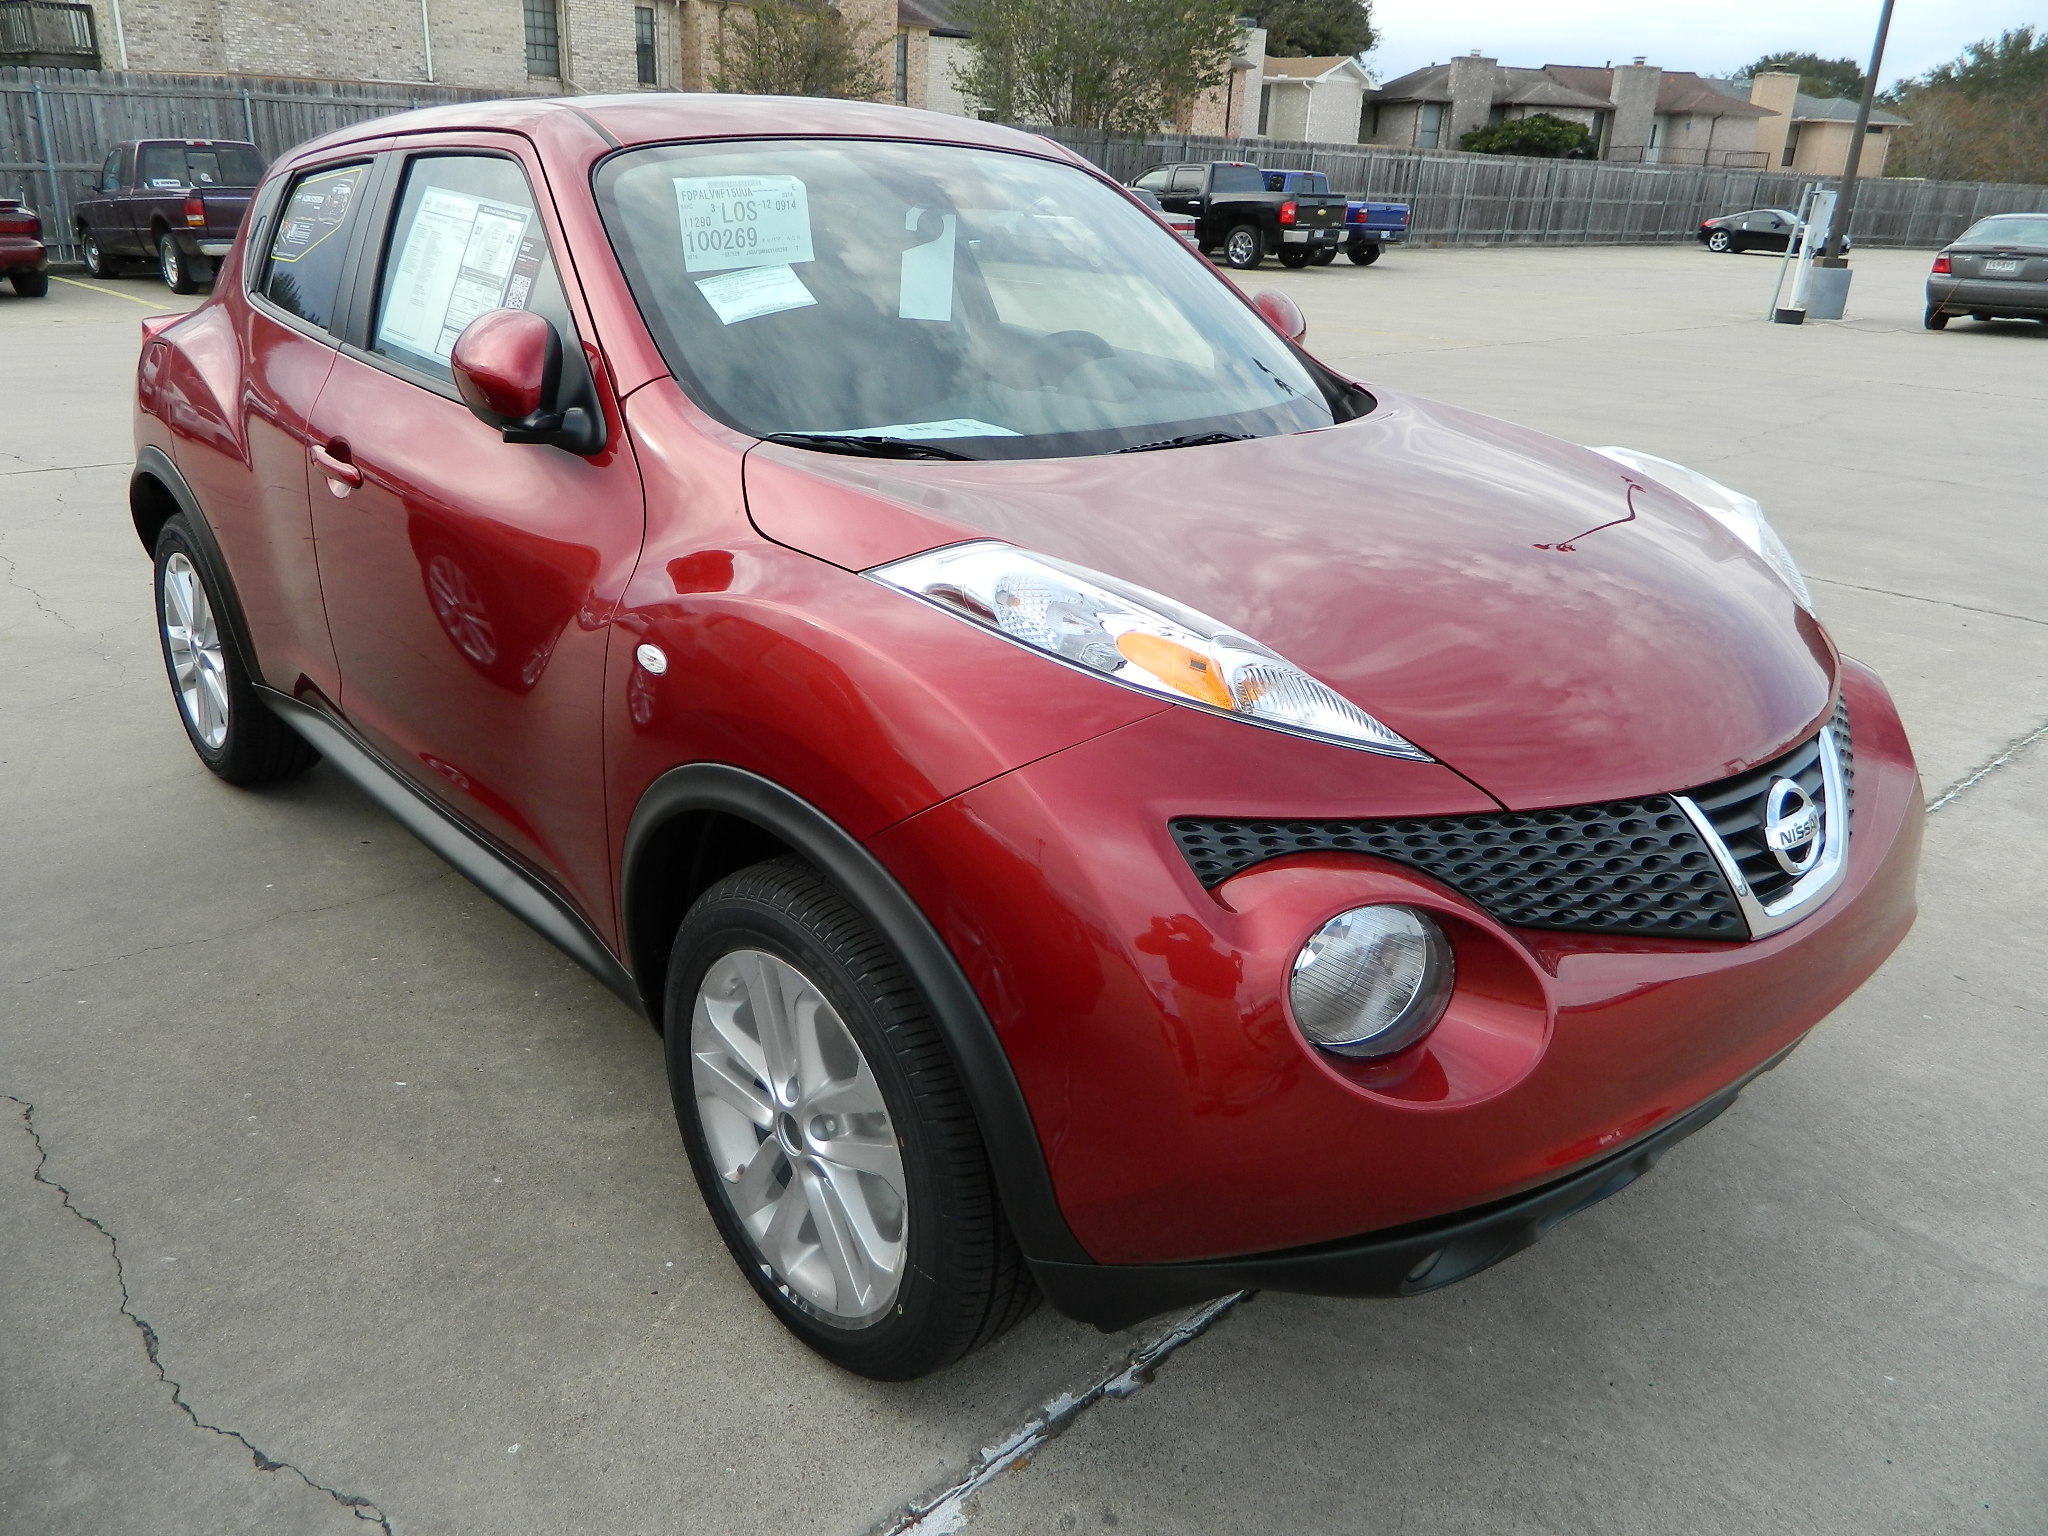 2012 Nissan Jukes have arrived at Victoria Nissan – Including SL's and SV's  | Victoria Nissan News